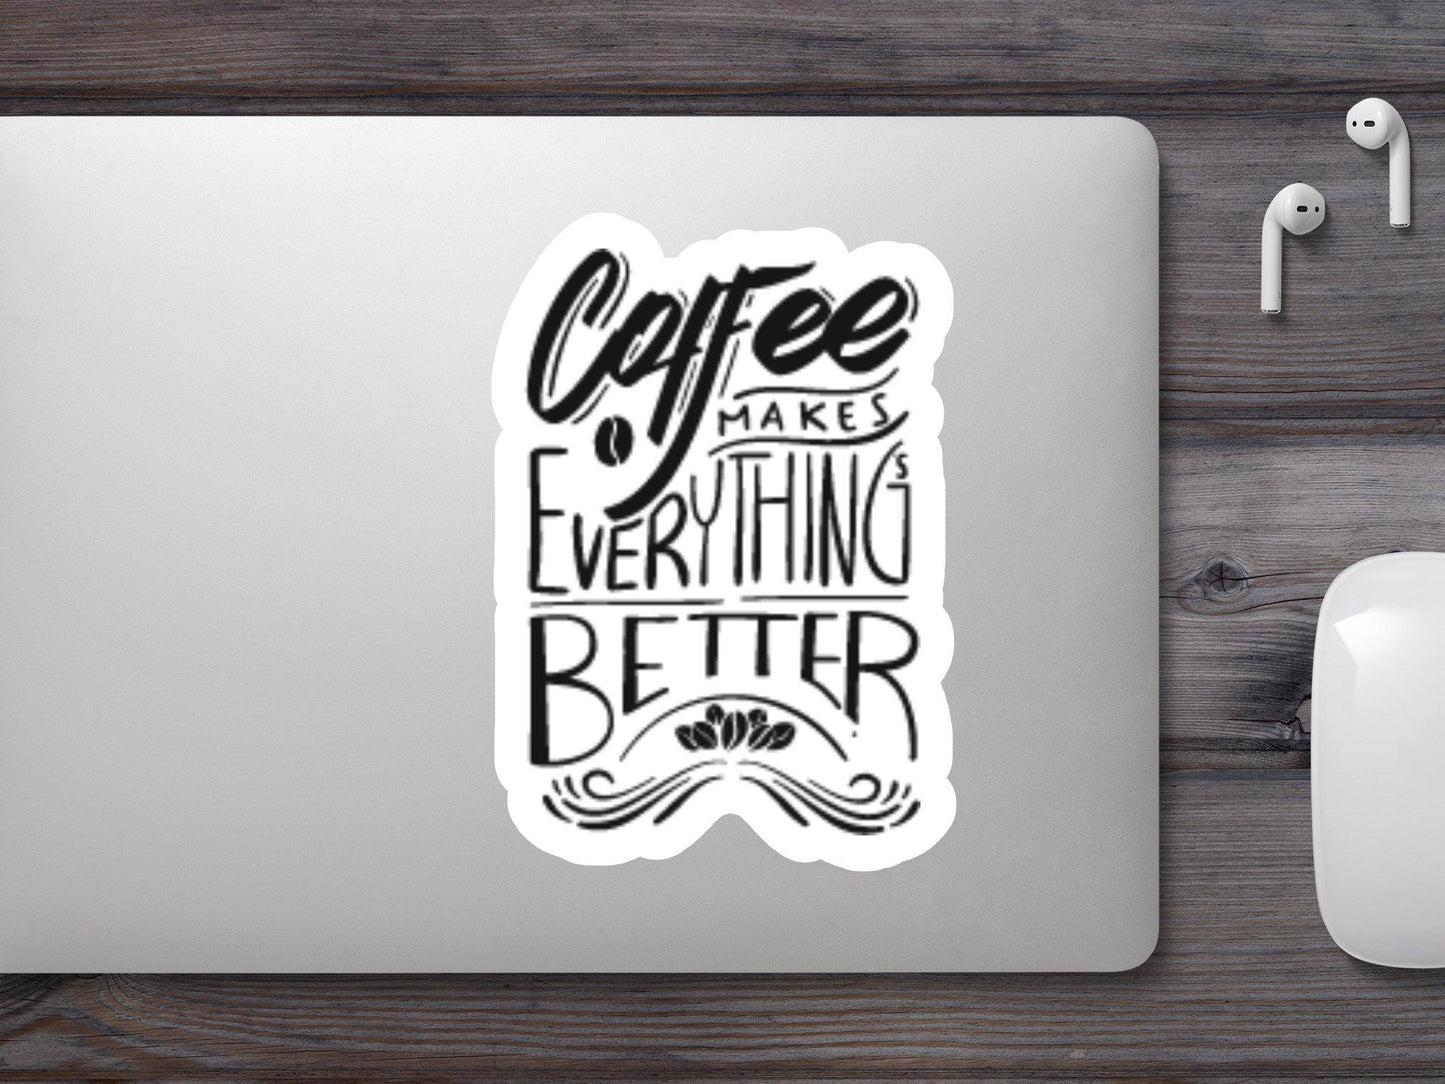 Coffee Makes Everything Better Sticker